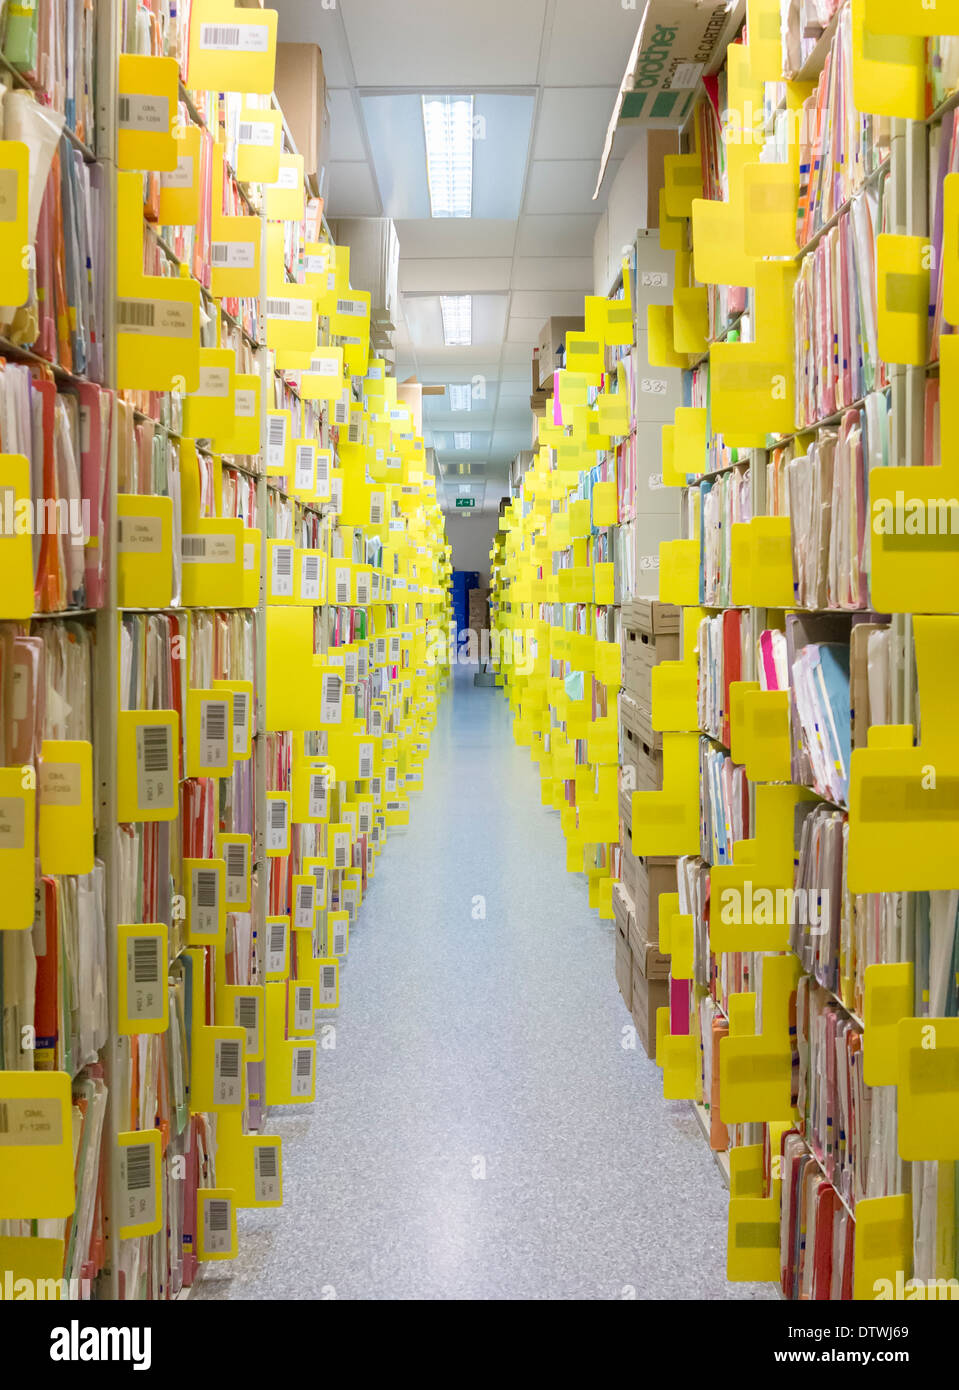 Rows of paper files containing patient records Stock Photo